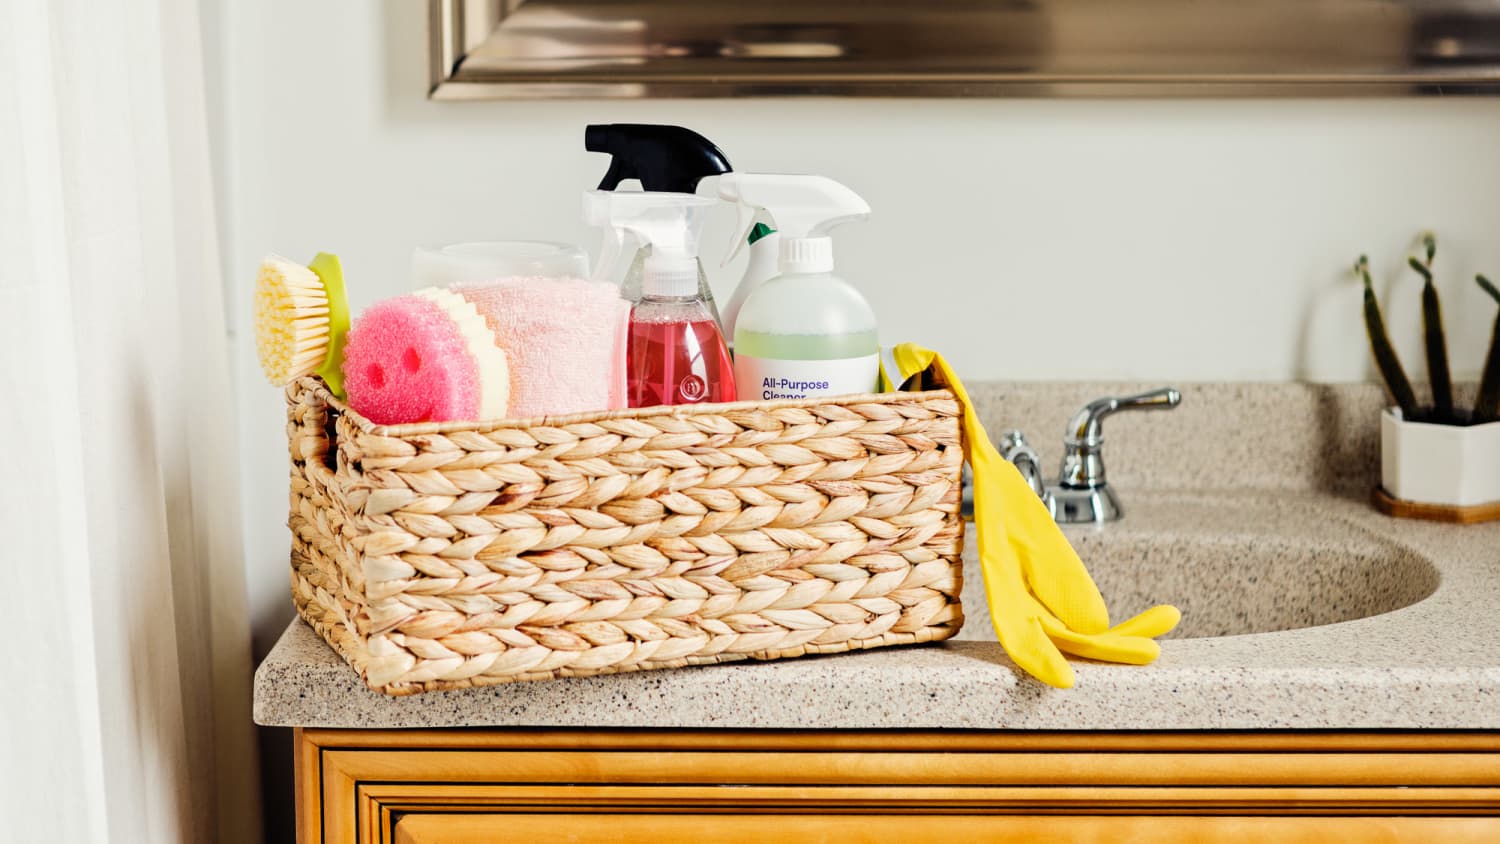 Minimalist Cleaning: 11 Products You Don't Really Need to Buy